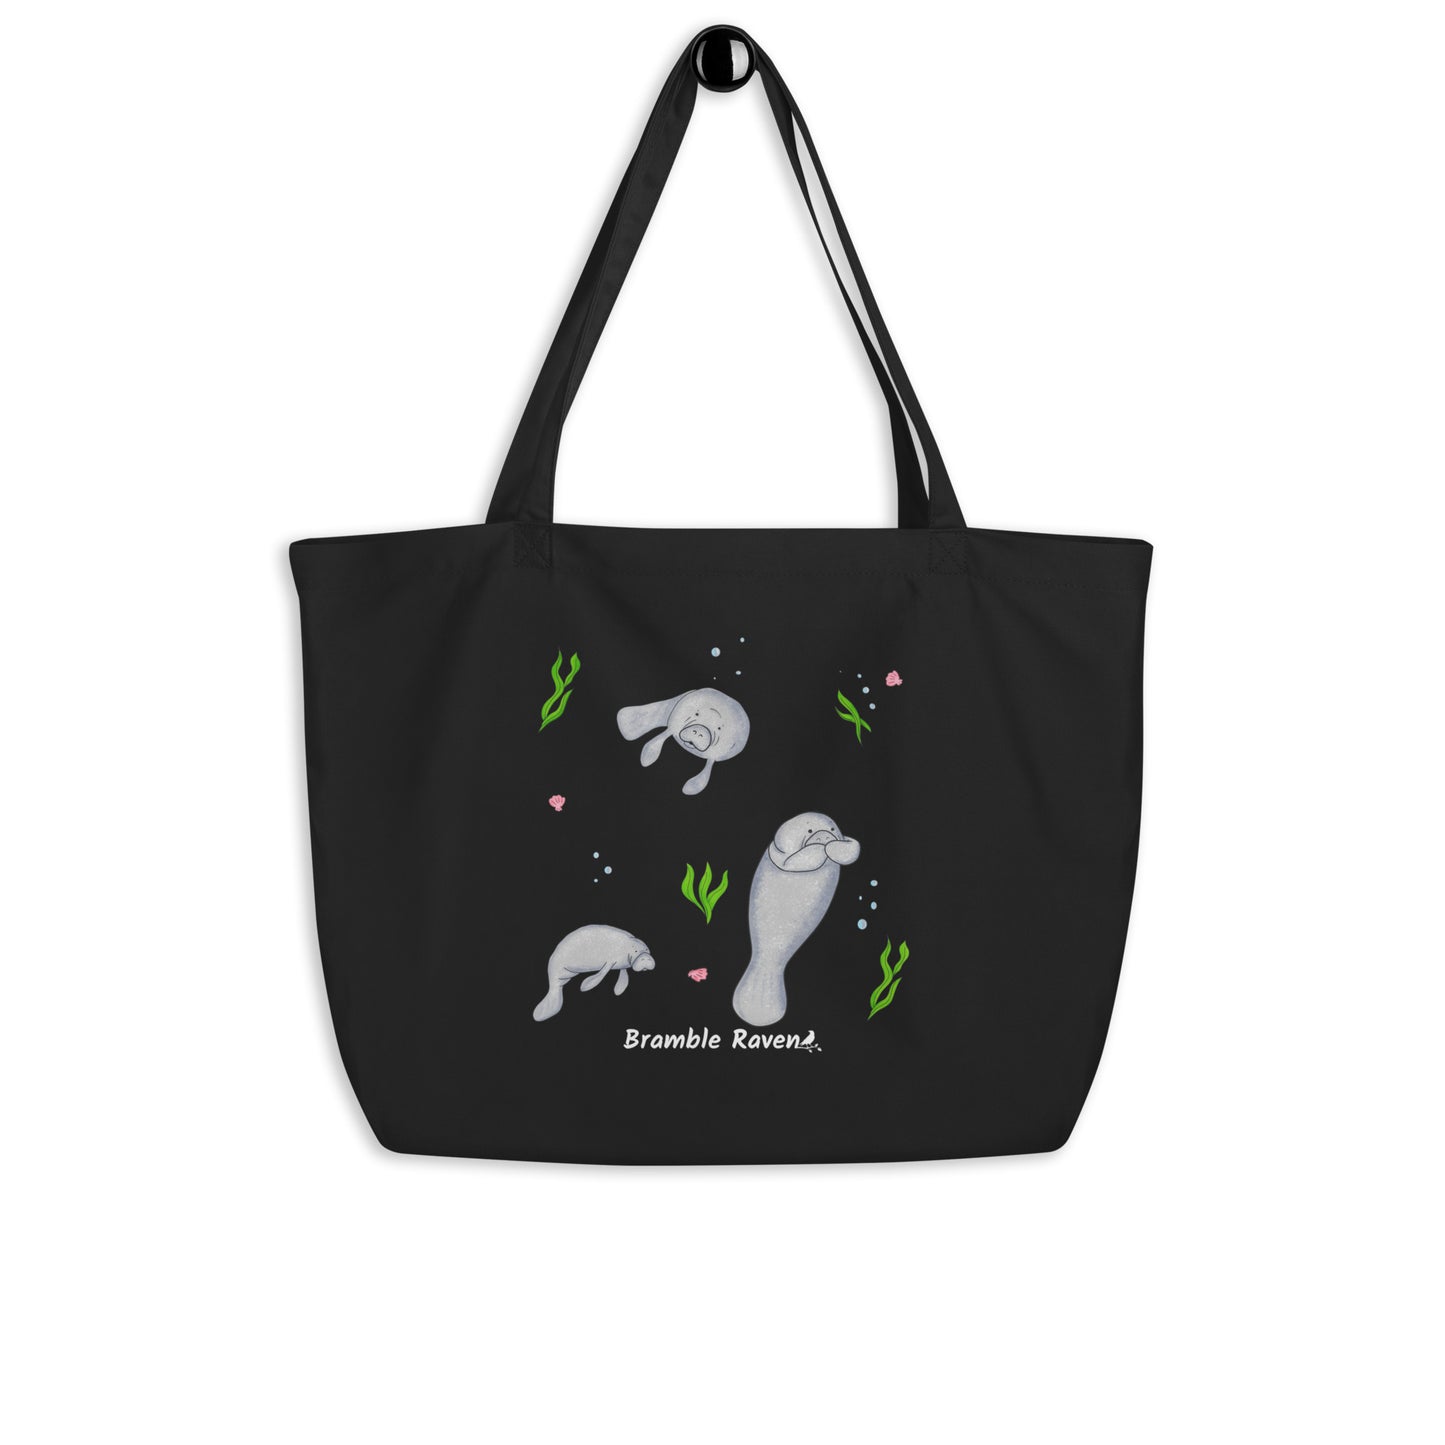 20″ × 14″ × 5″ 100% organic cotton tote bag. Features three manatees with accents of seashells, seaweed, and bubbles. Black fabric with dual handles. Shown hanging on a knob.